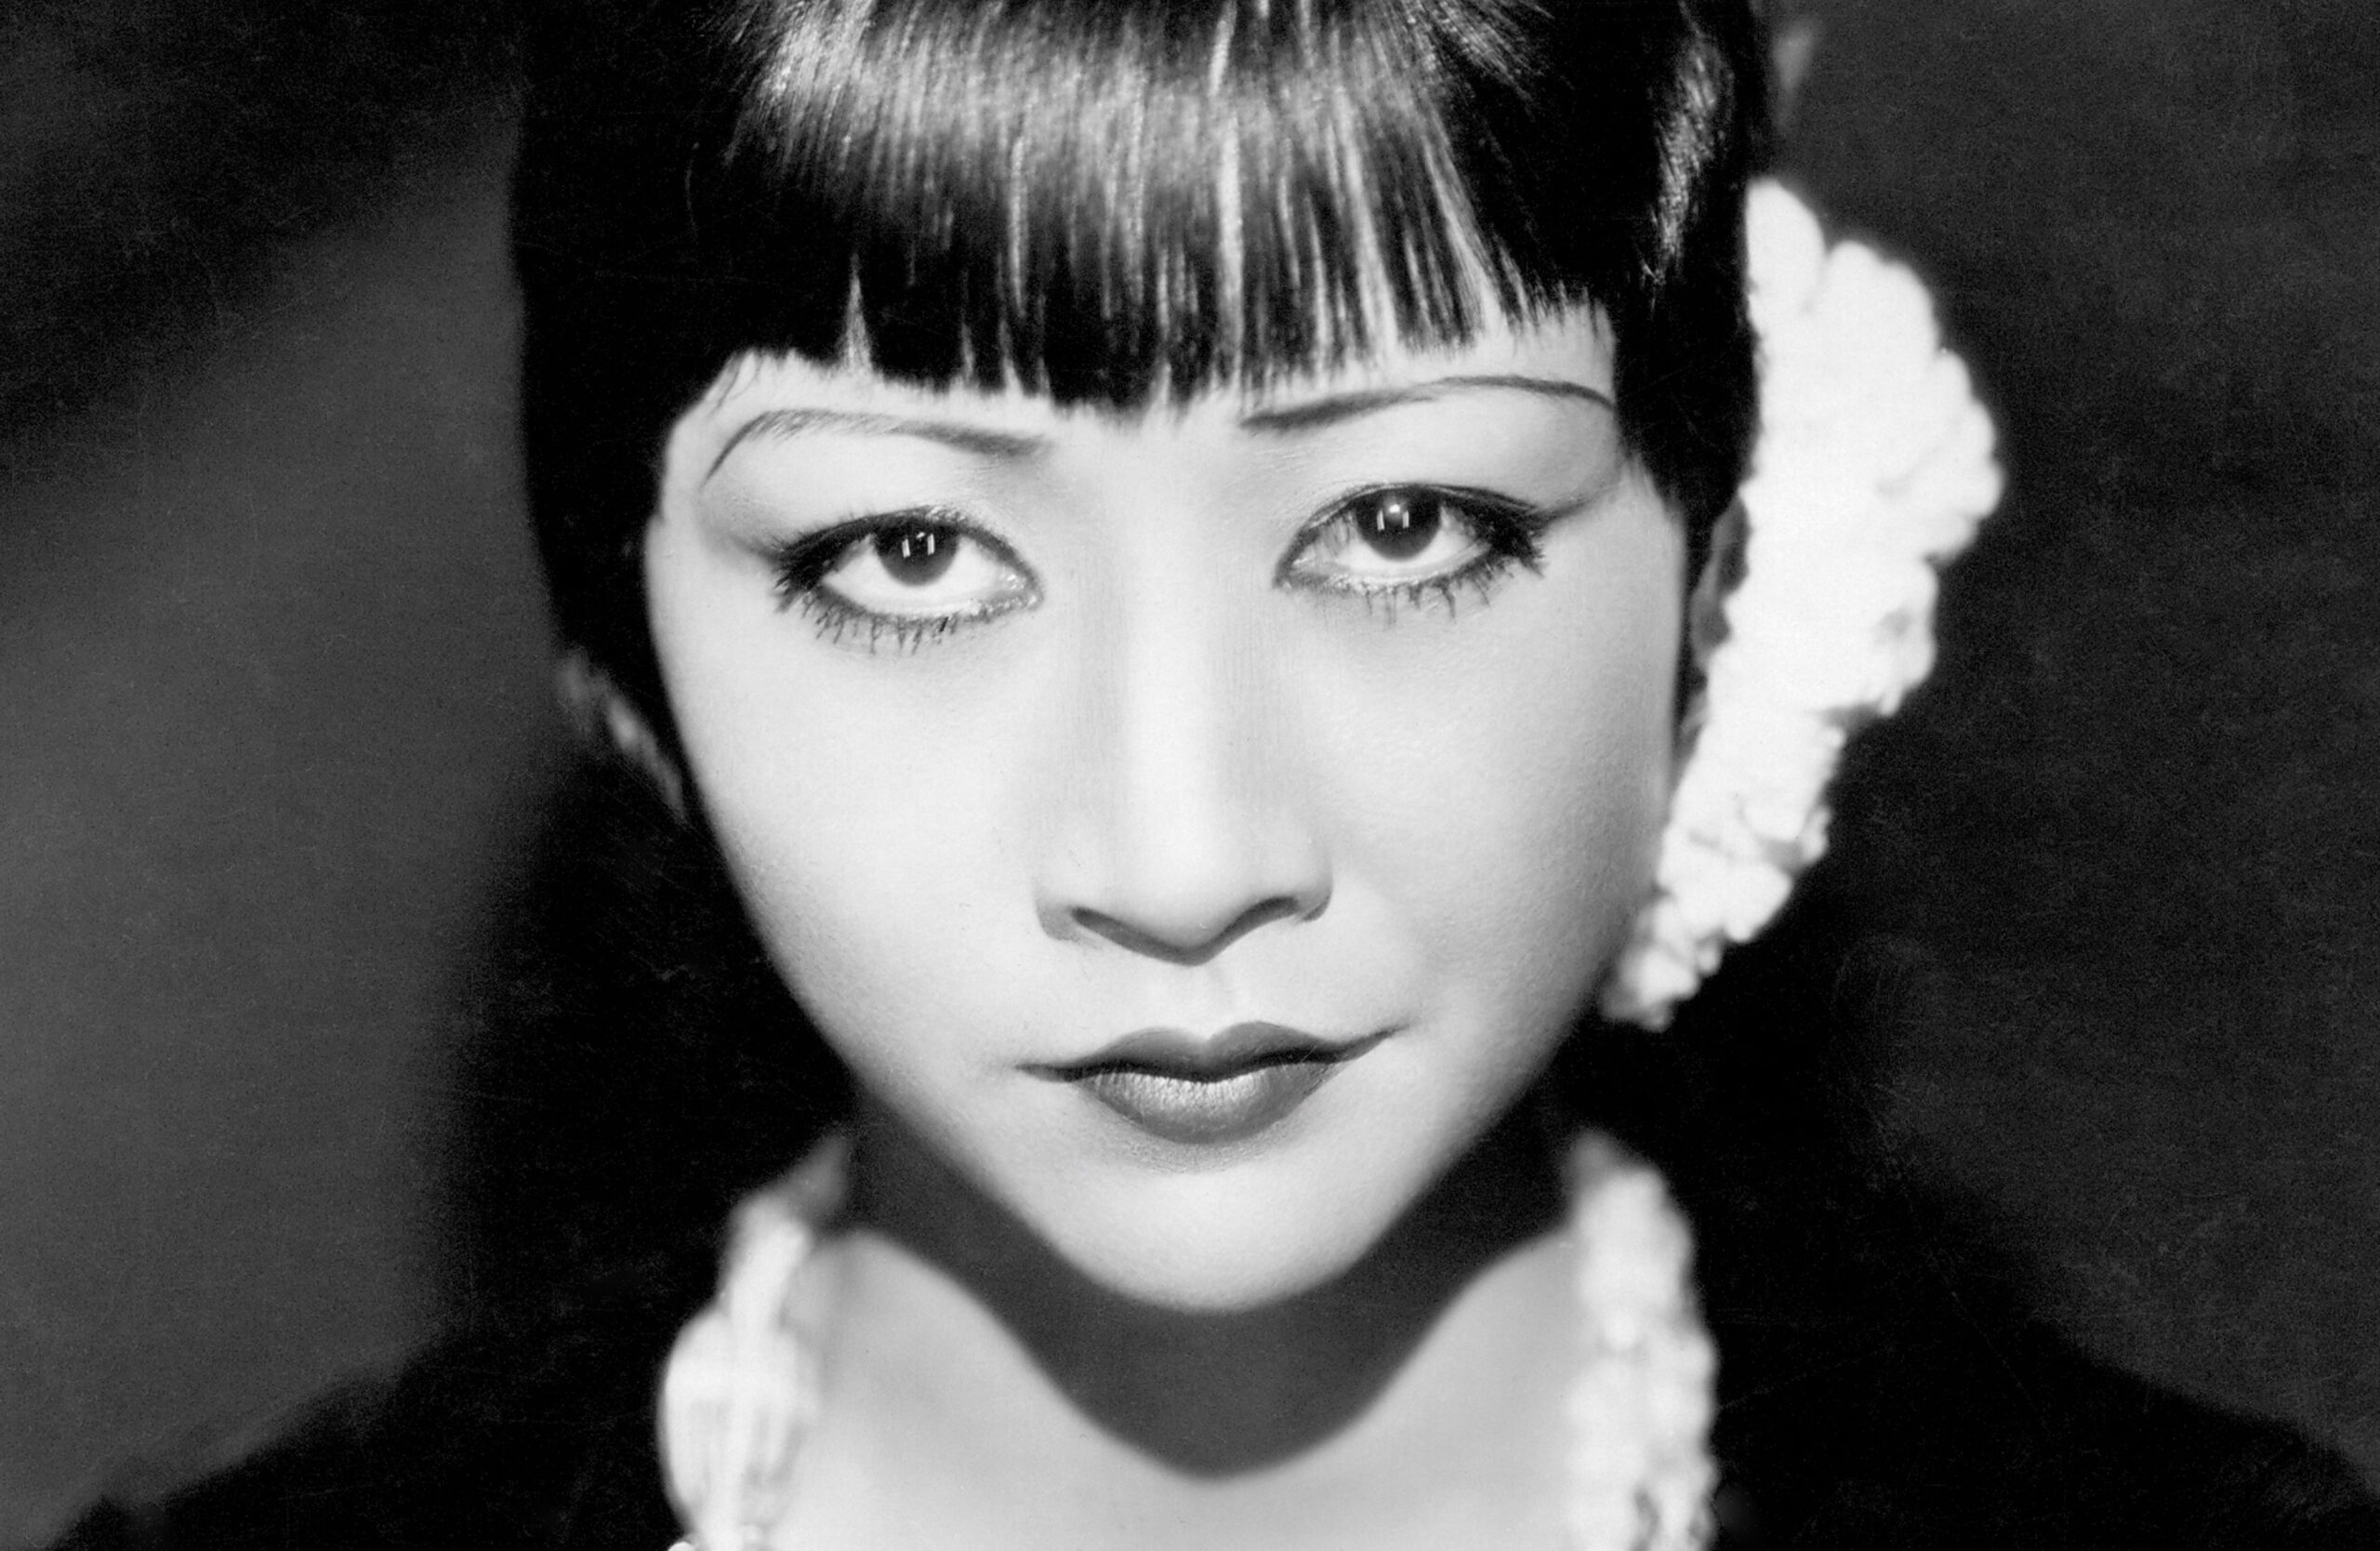 Featured image for “Anna May Wong, Chinese American Film Star, Dealt With Racism and Stereotypes”